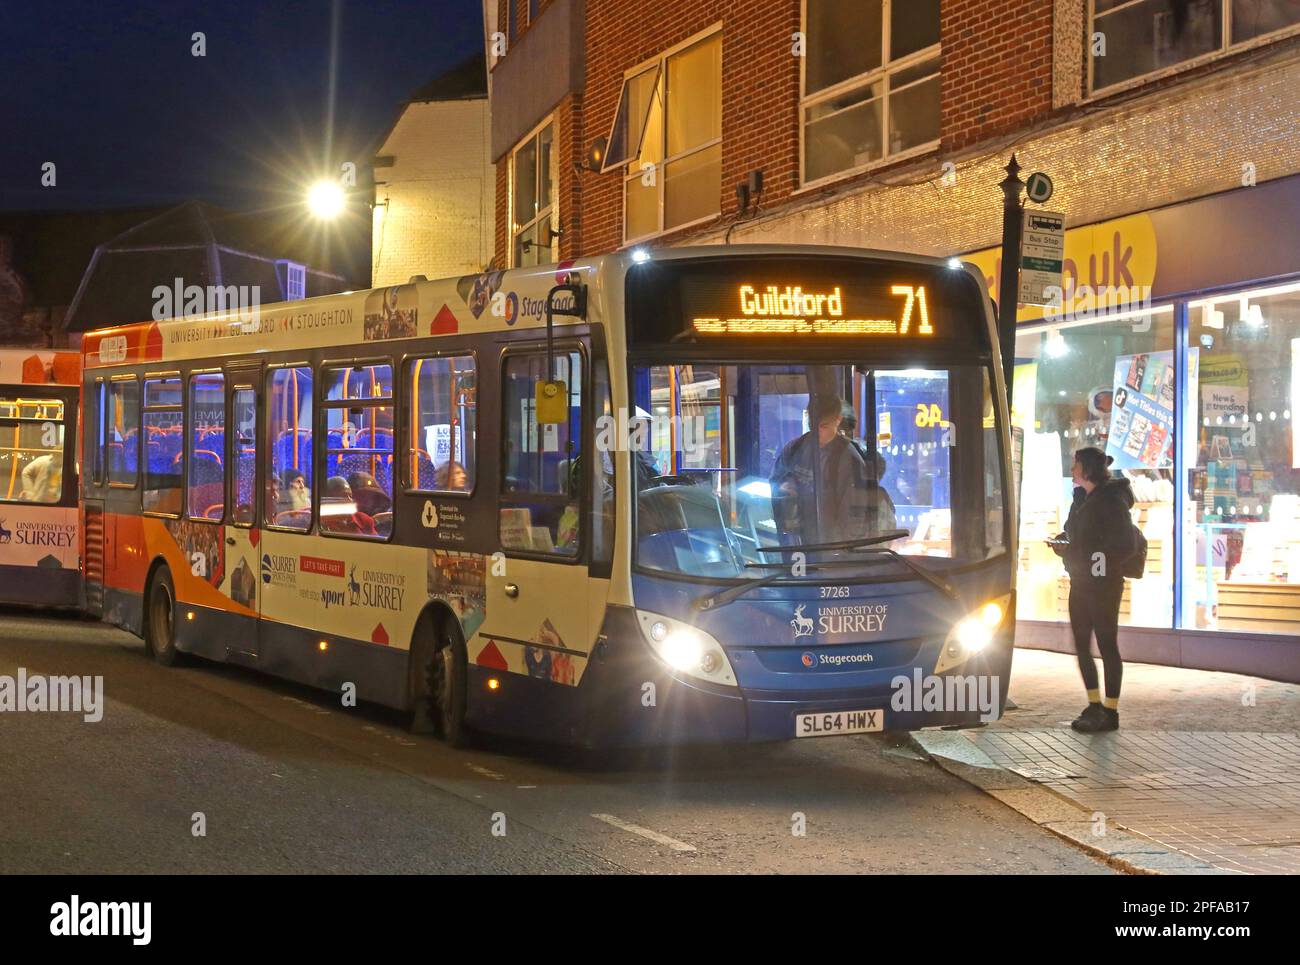 Bus transport in Surrey, Stagecoach service 71 Midhurst to Guildford, SL64 HWX, unit 37263 at Godalming town centre, evening service at dusk Stock Photo